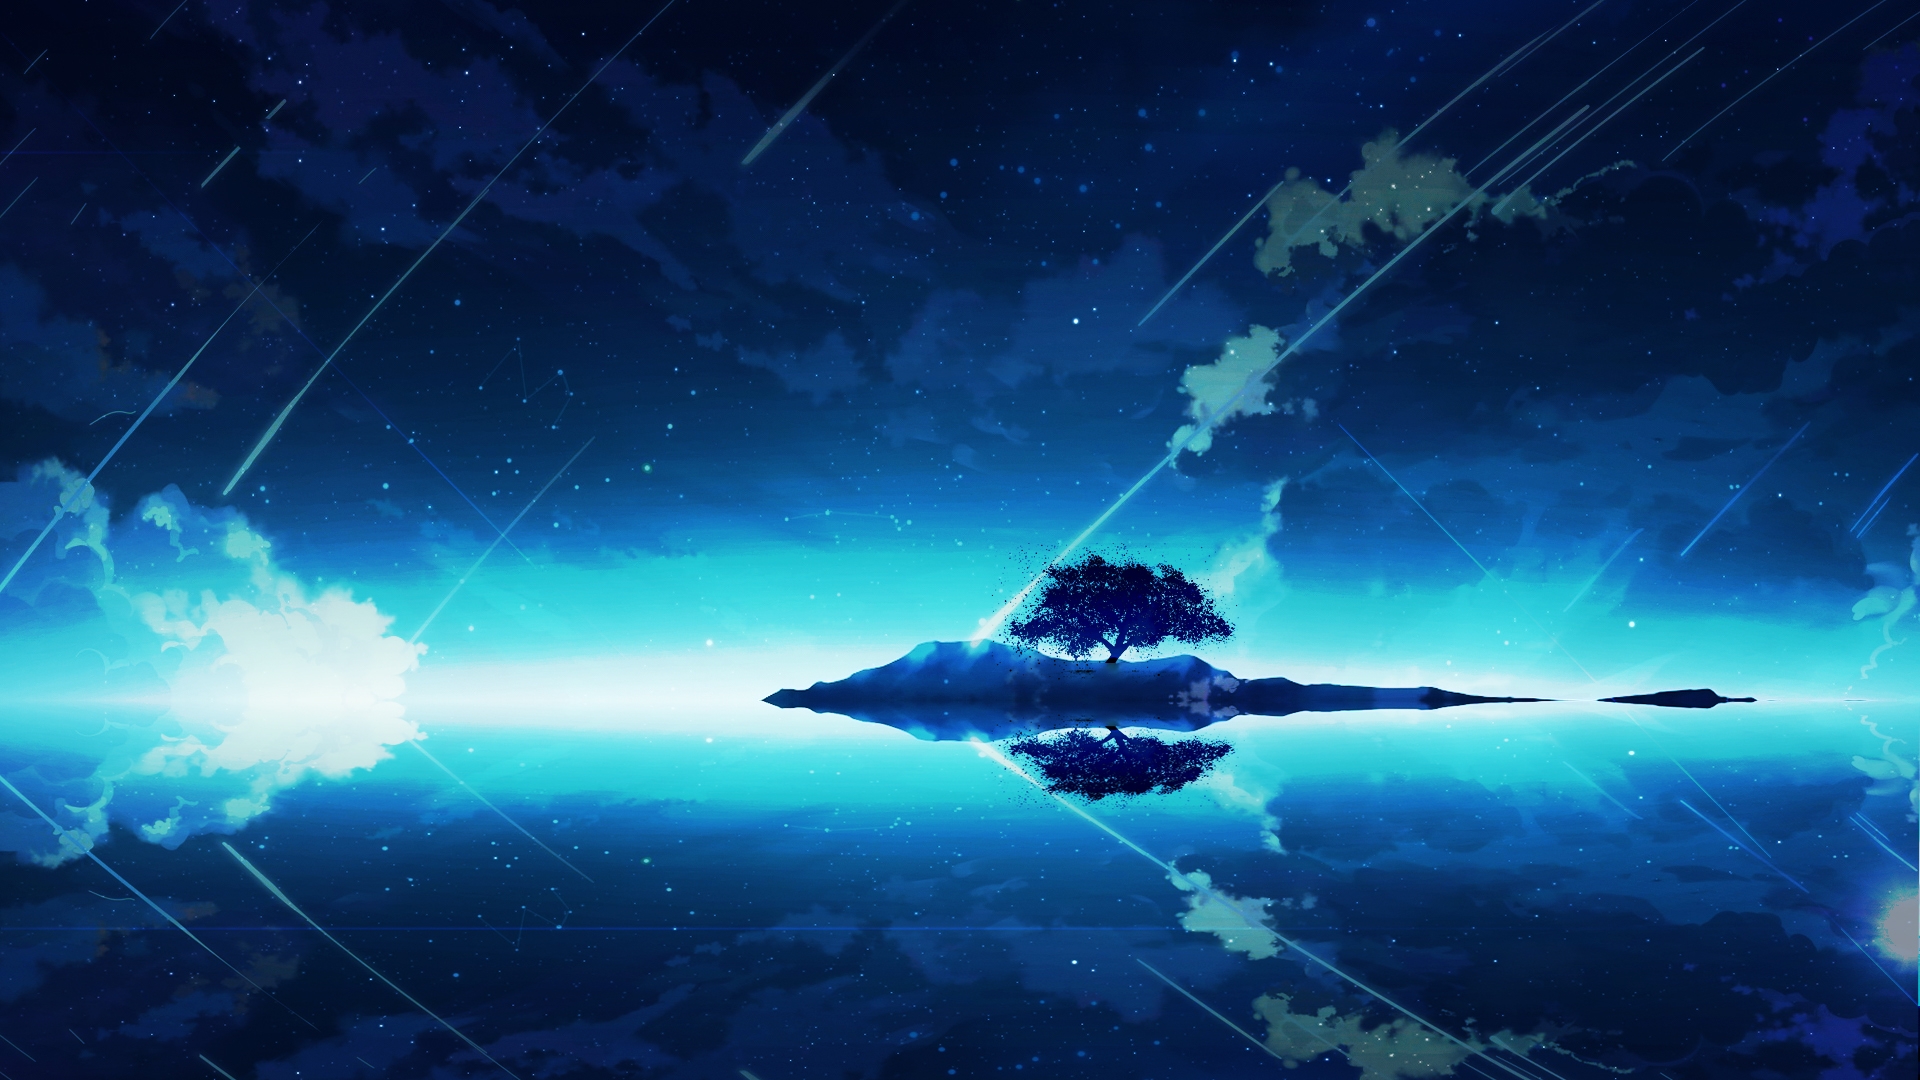 Download 1920x1080 Anime Landscape, Lonely Tree, Reflection, Water